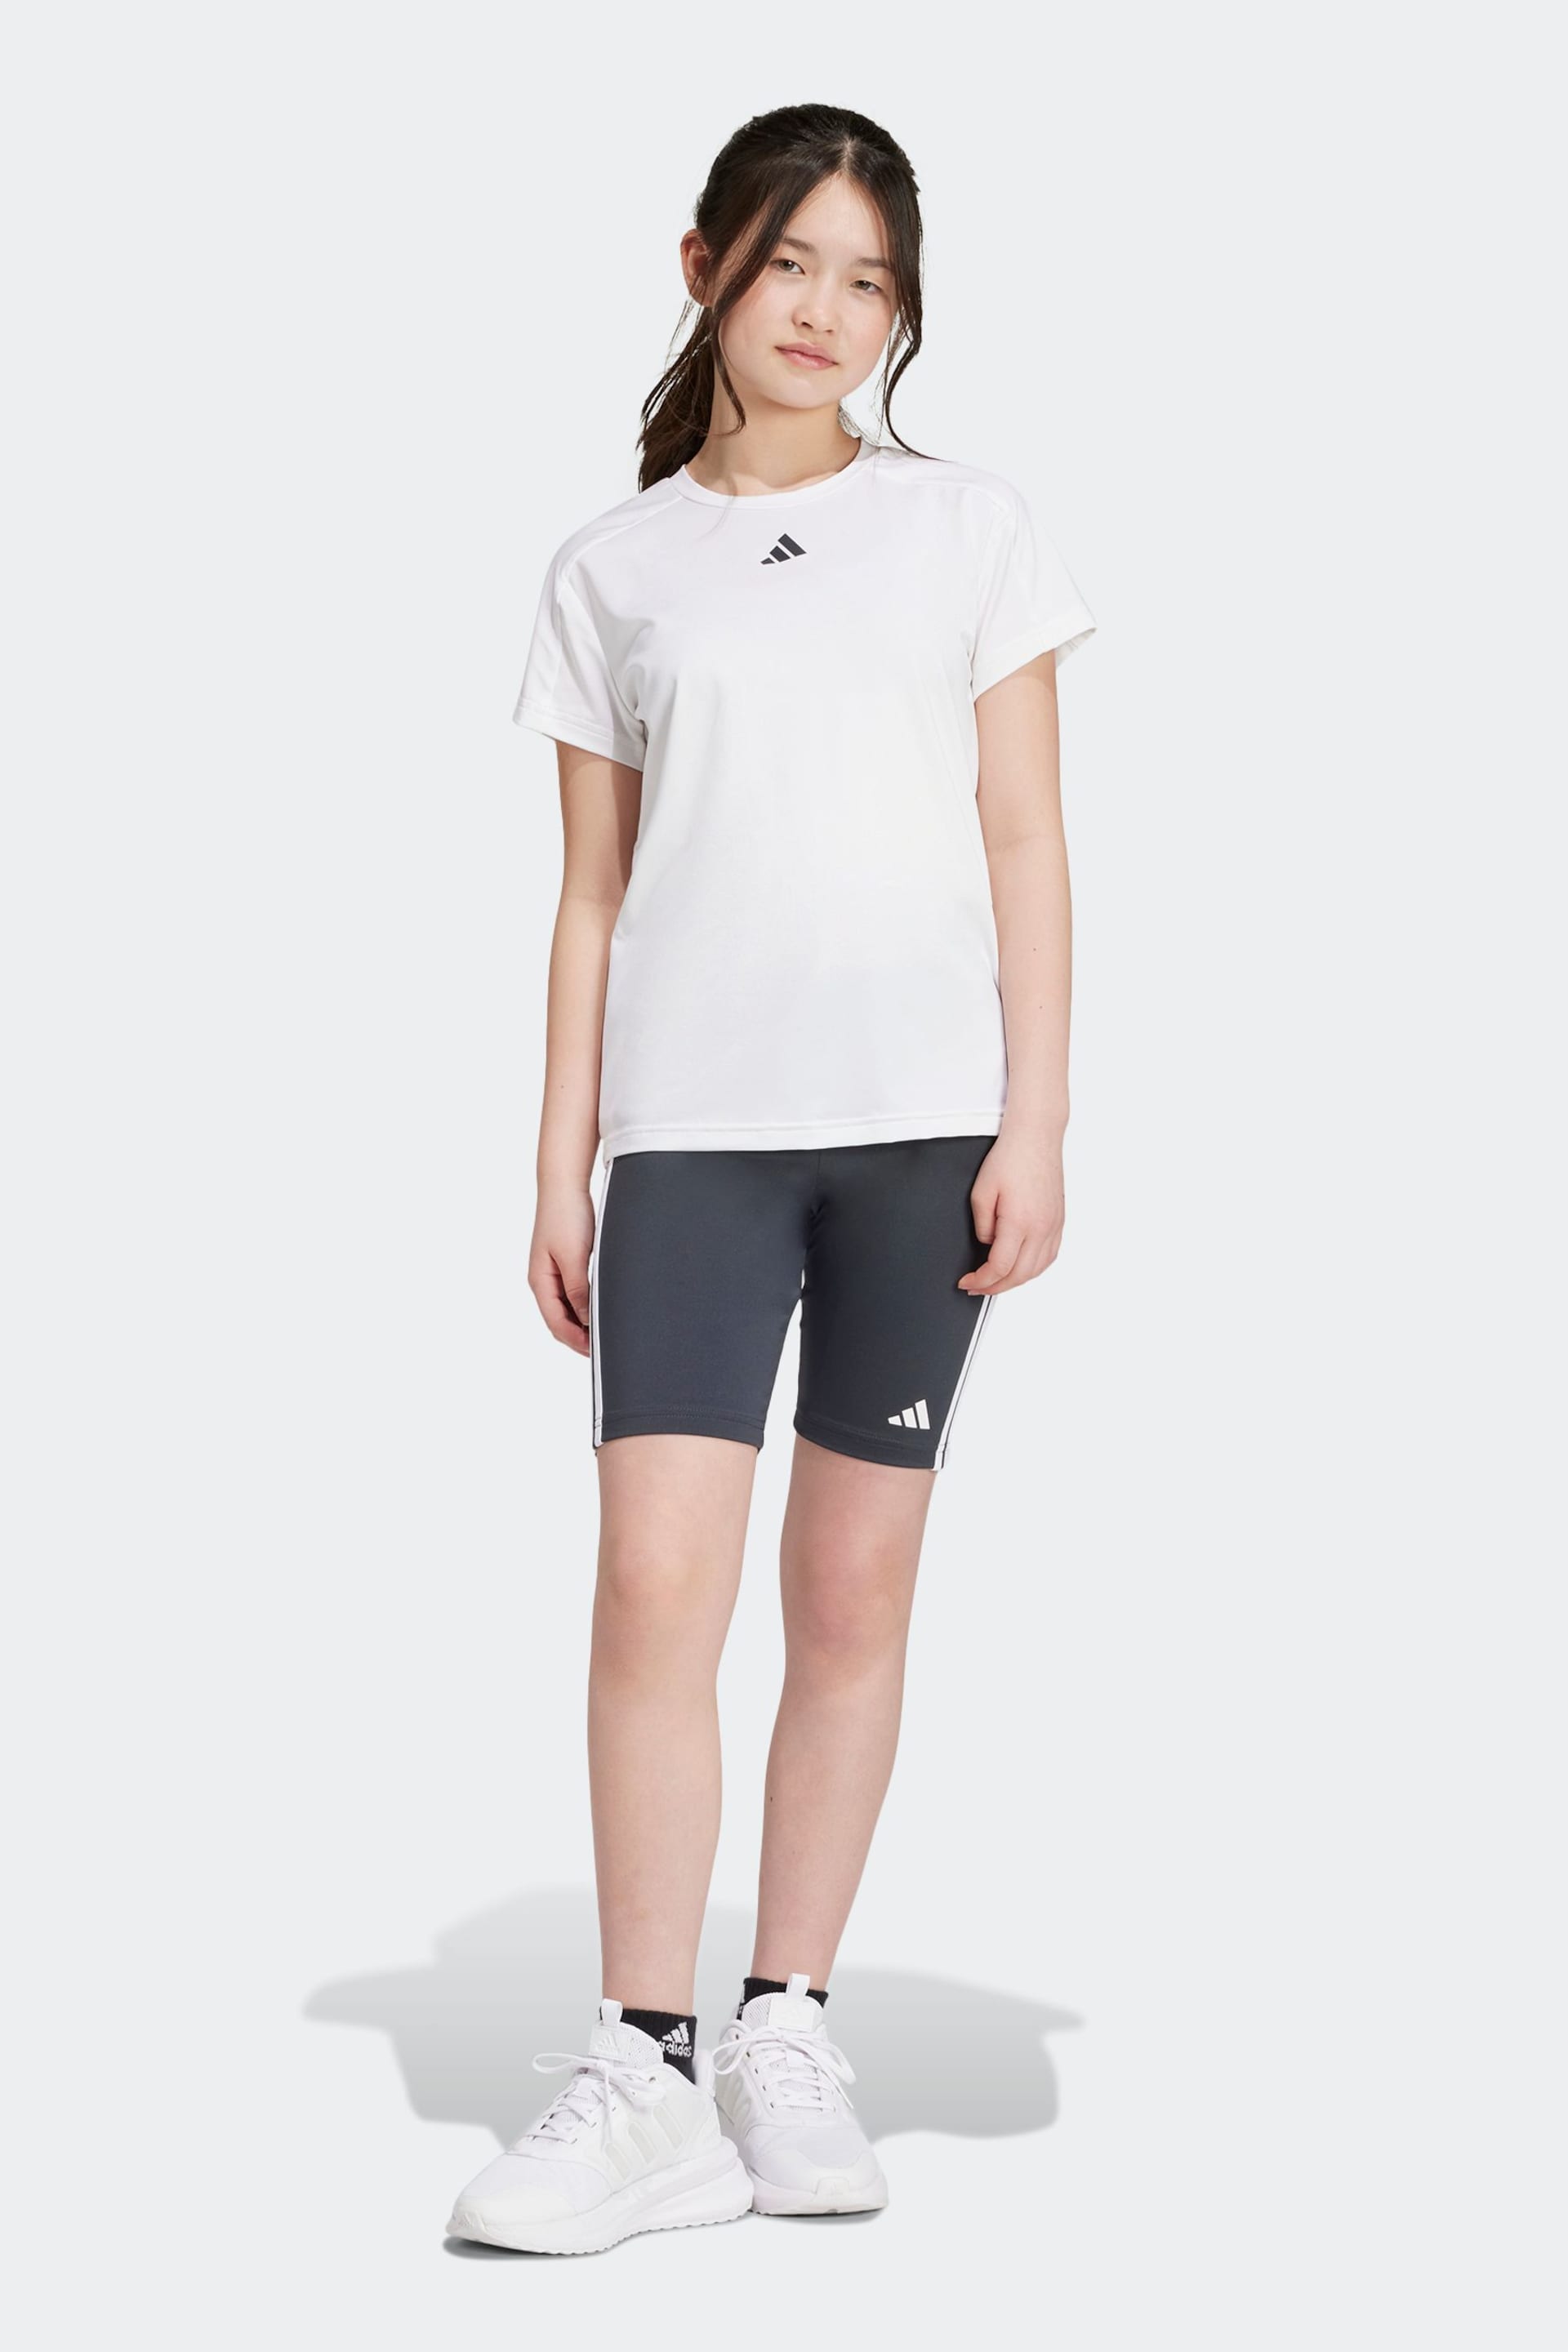 adidas White Kids Train Essentials T-Shirt and Shorts Set - Image 1 of 13